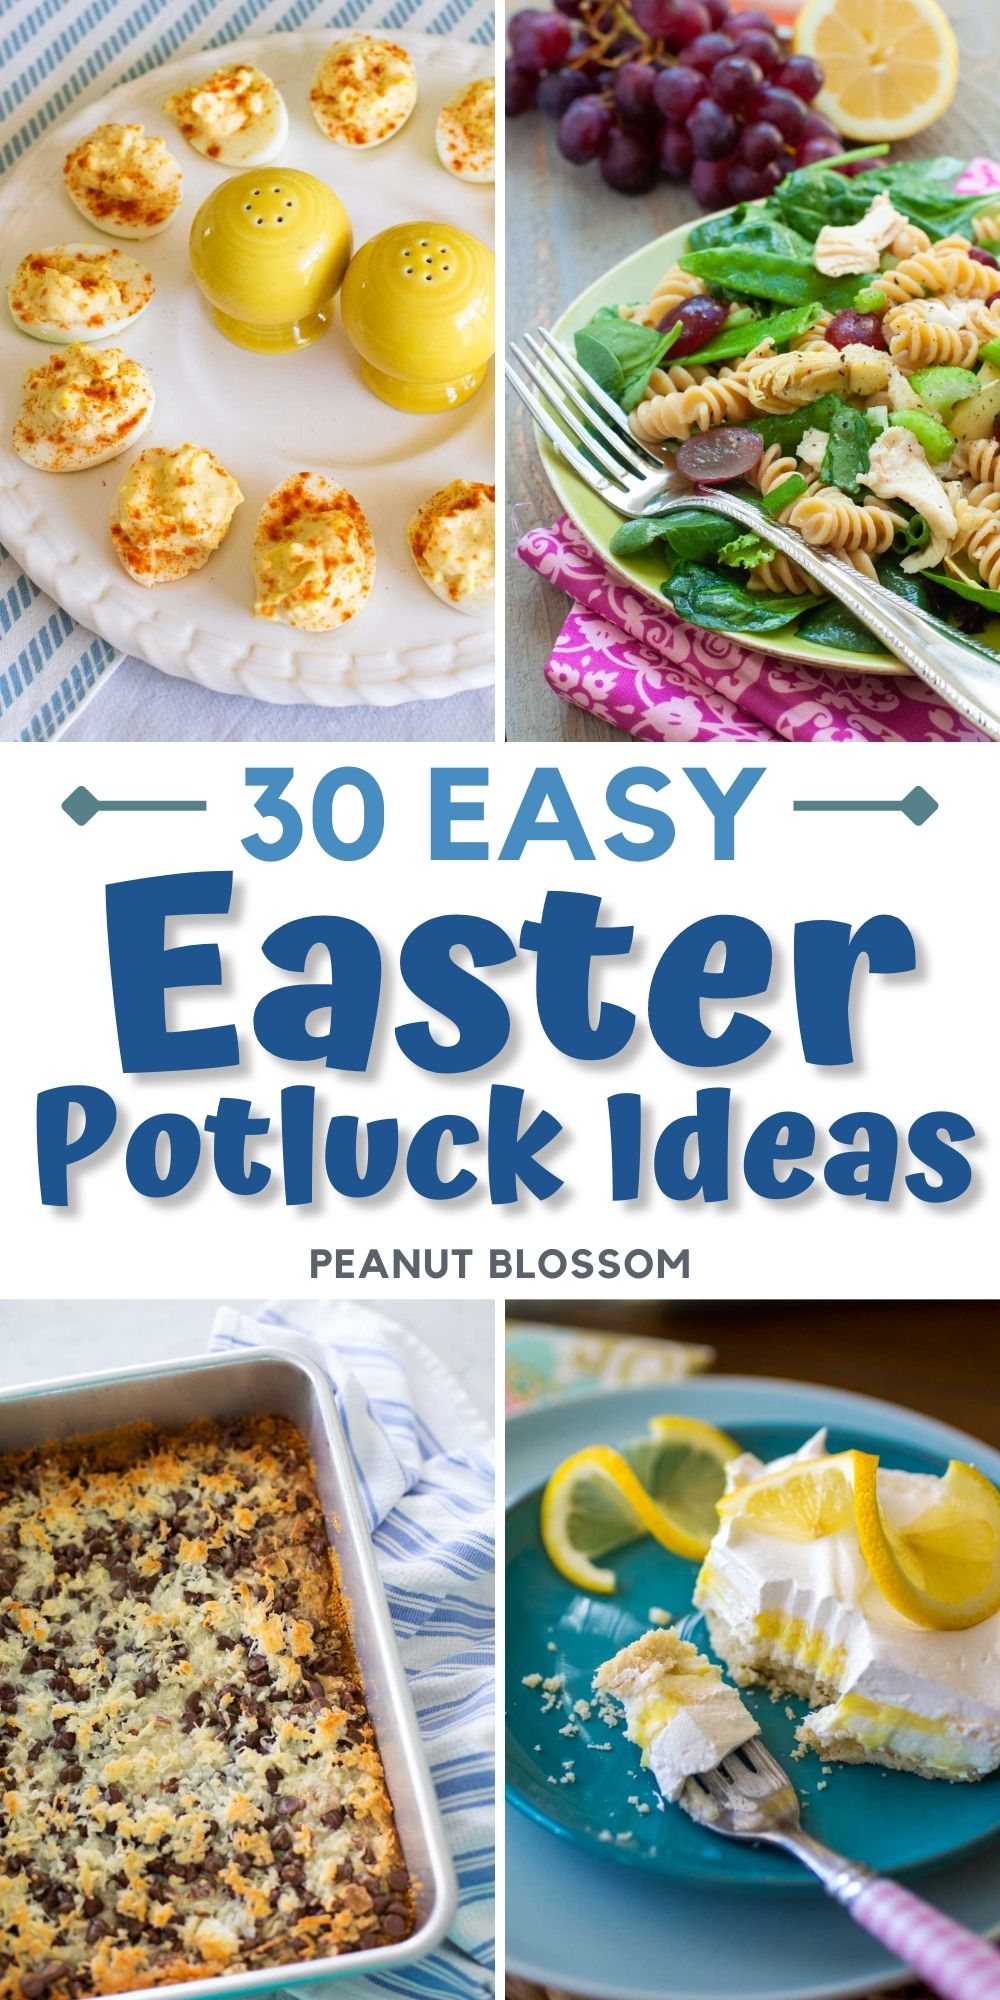 A photo collage shows 4 travel-friendly Easter recipes for potlucks.